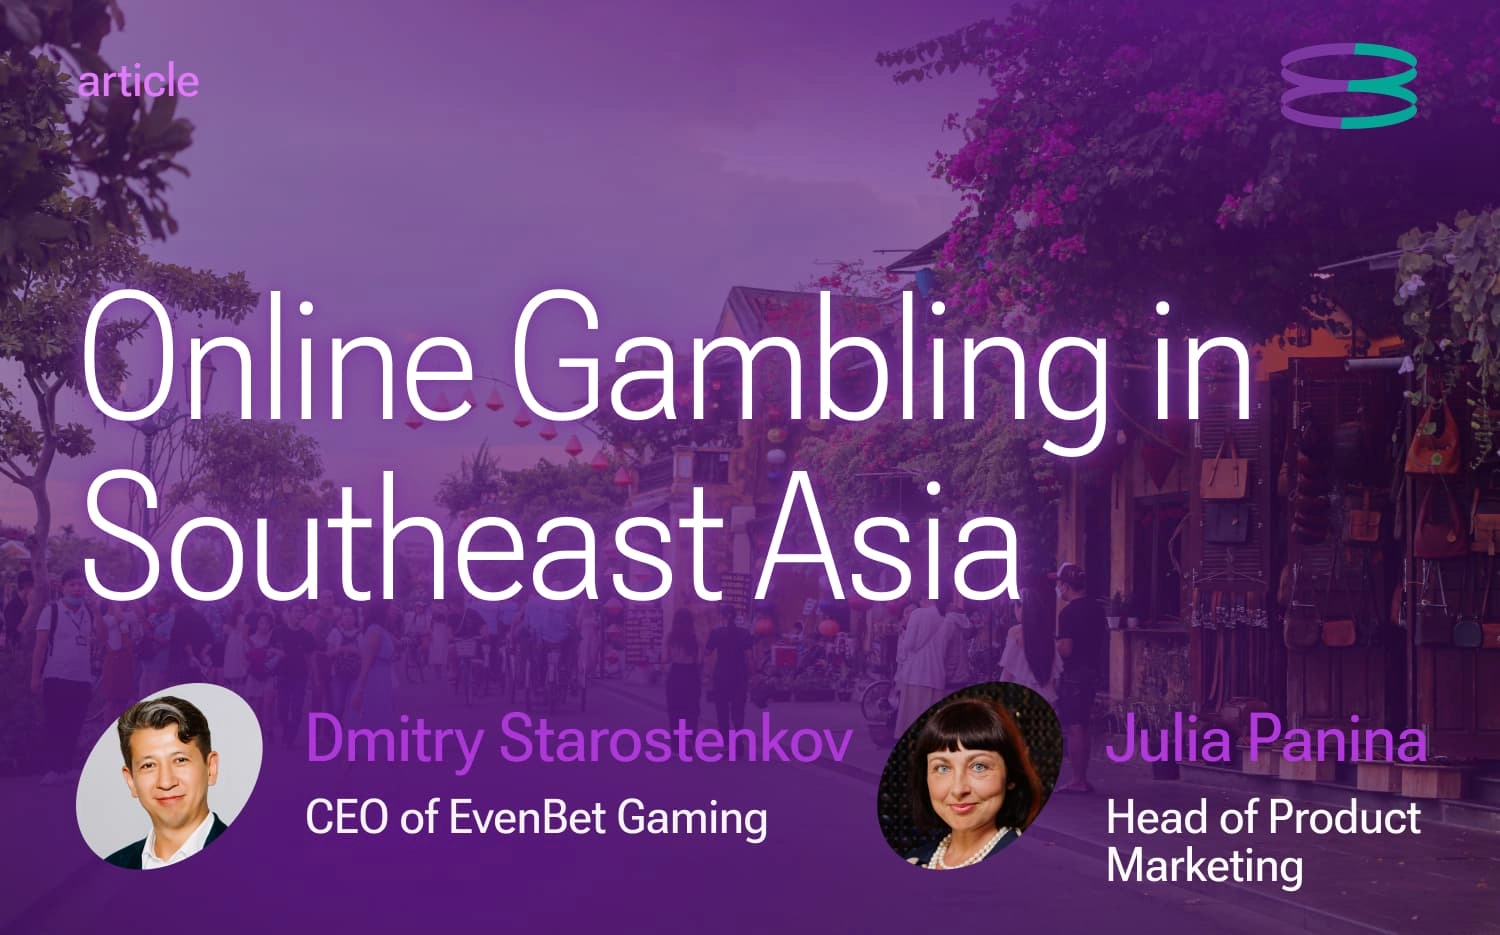 Features of the Online Gambling Market in Southeast Asia